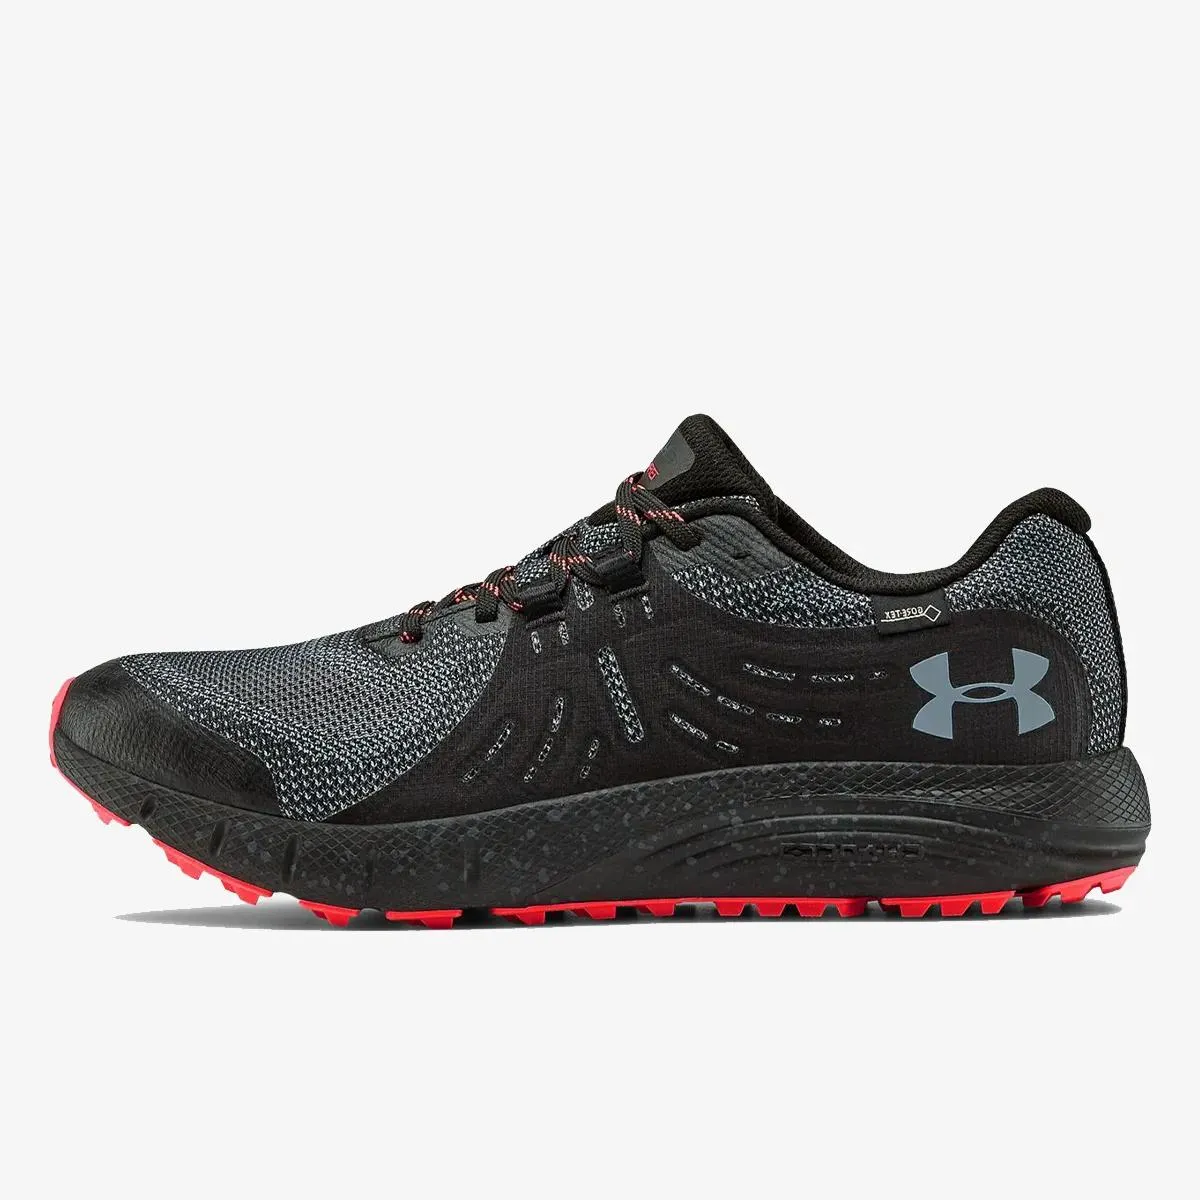 Under Armour Charged Bandit Trail GTX 